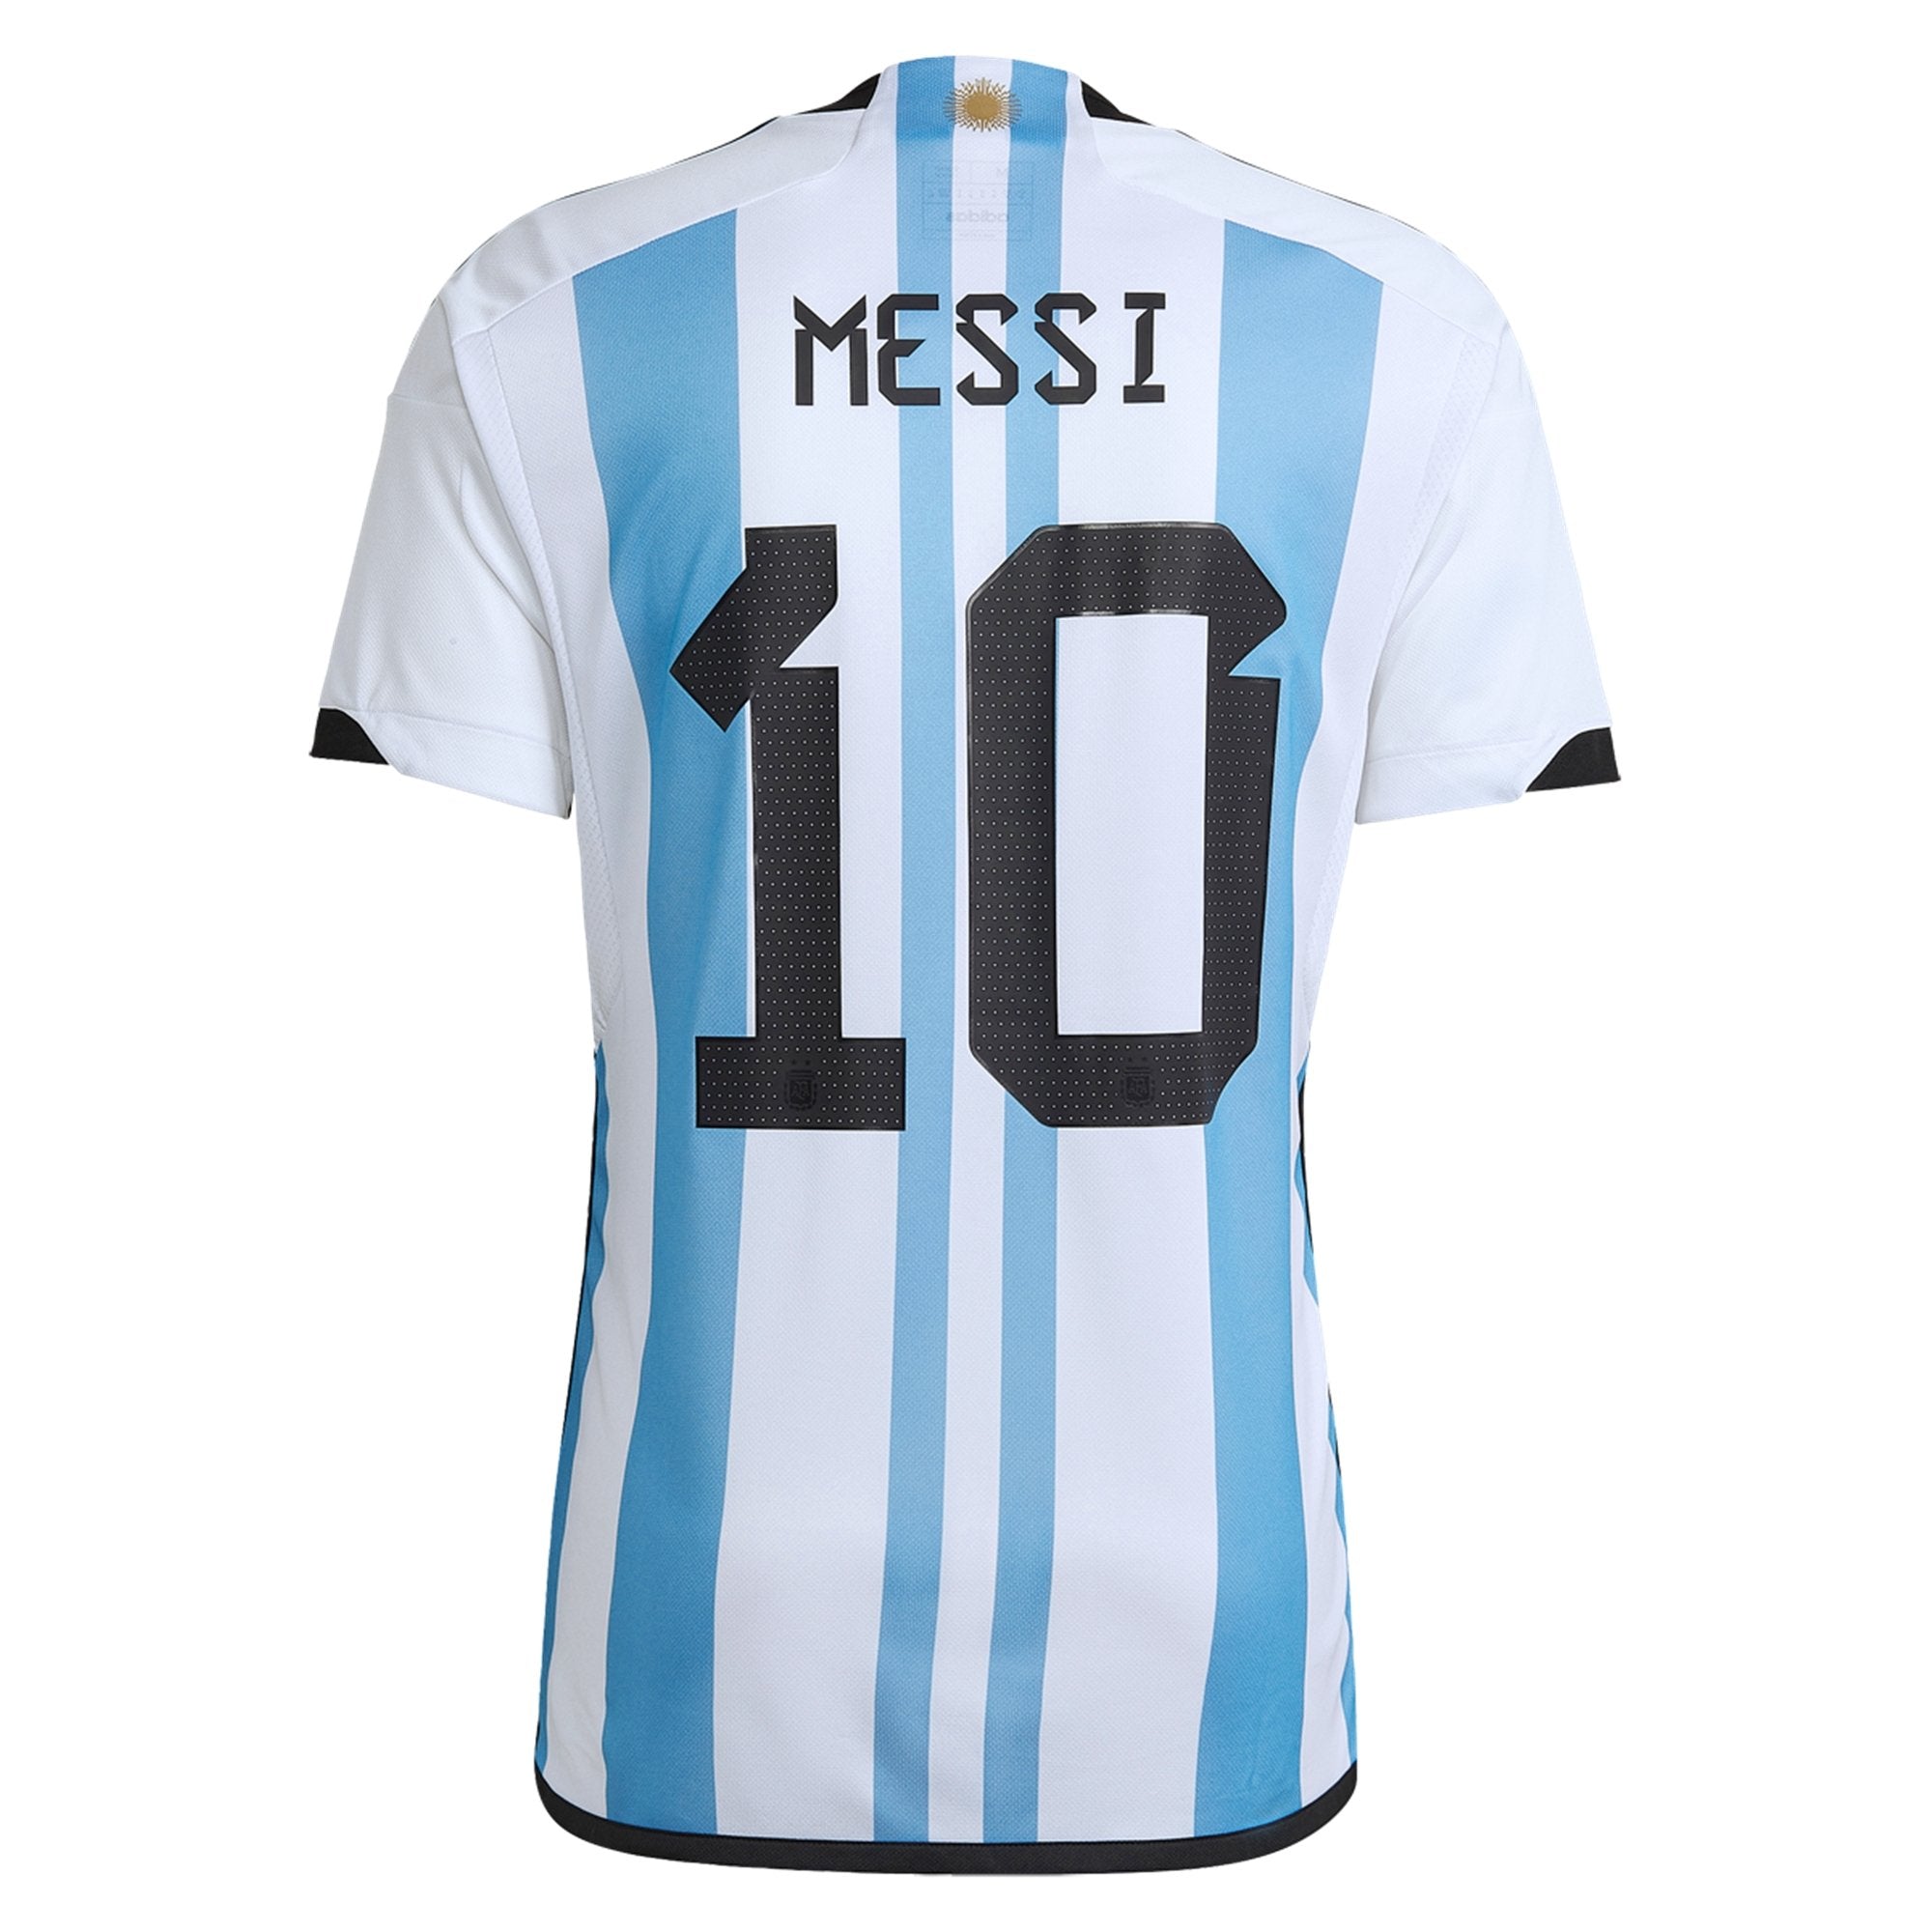 messi current jersey